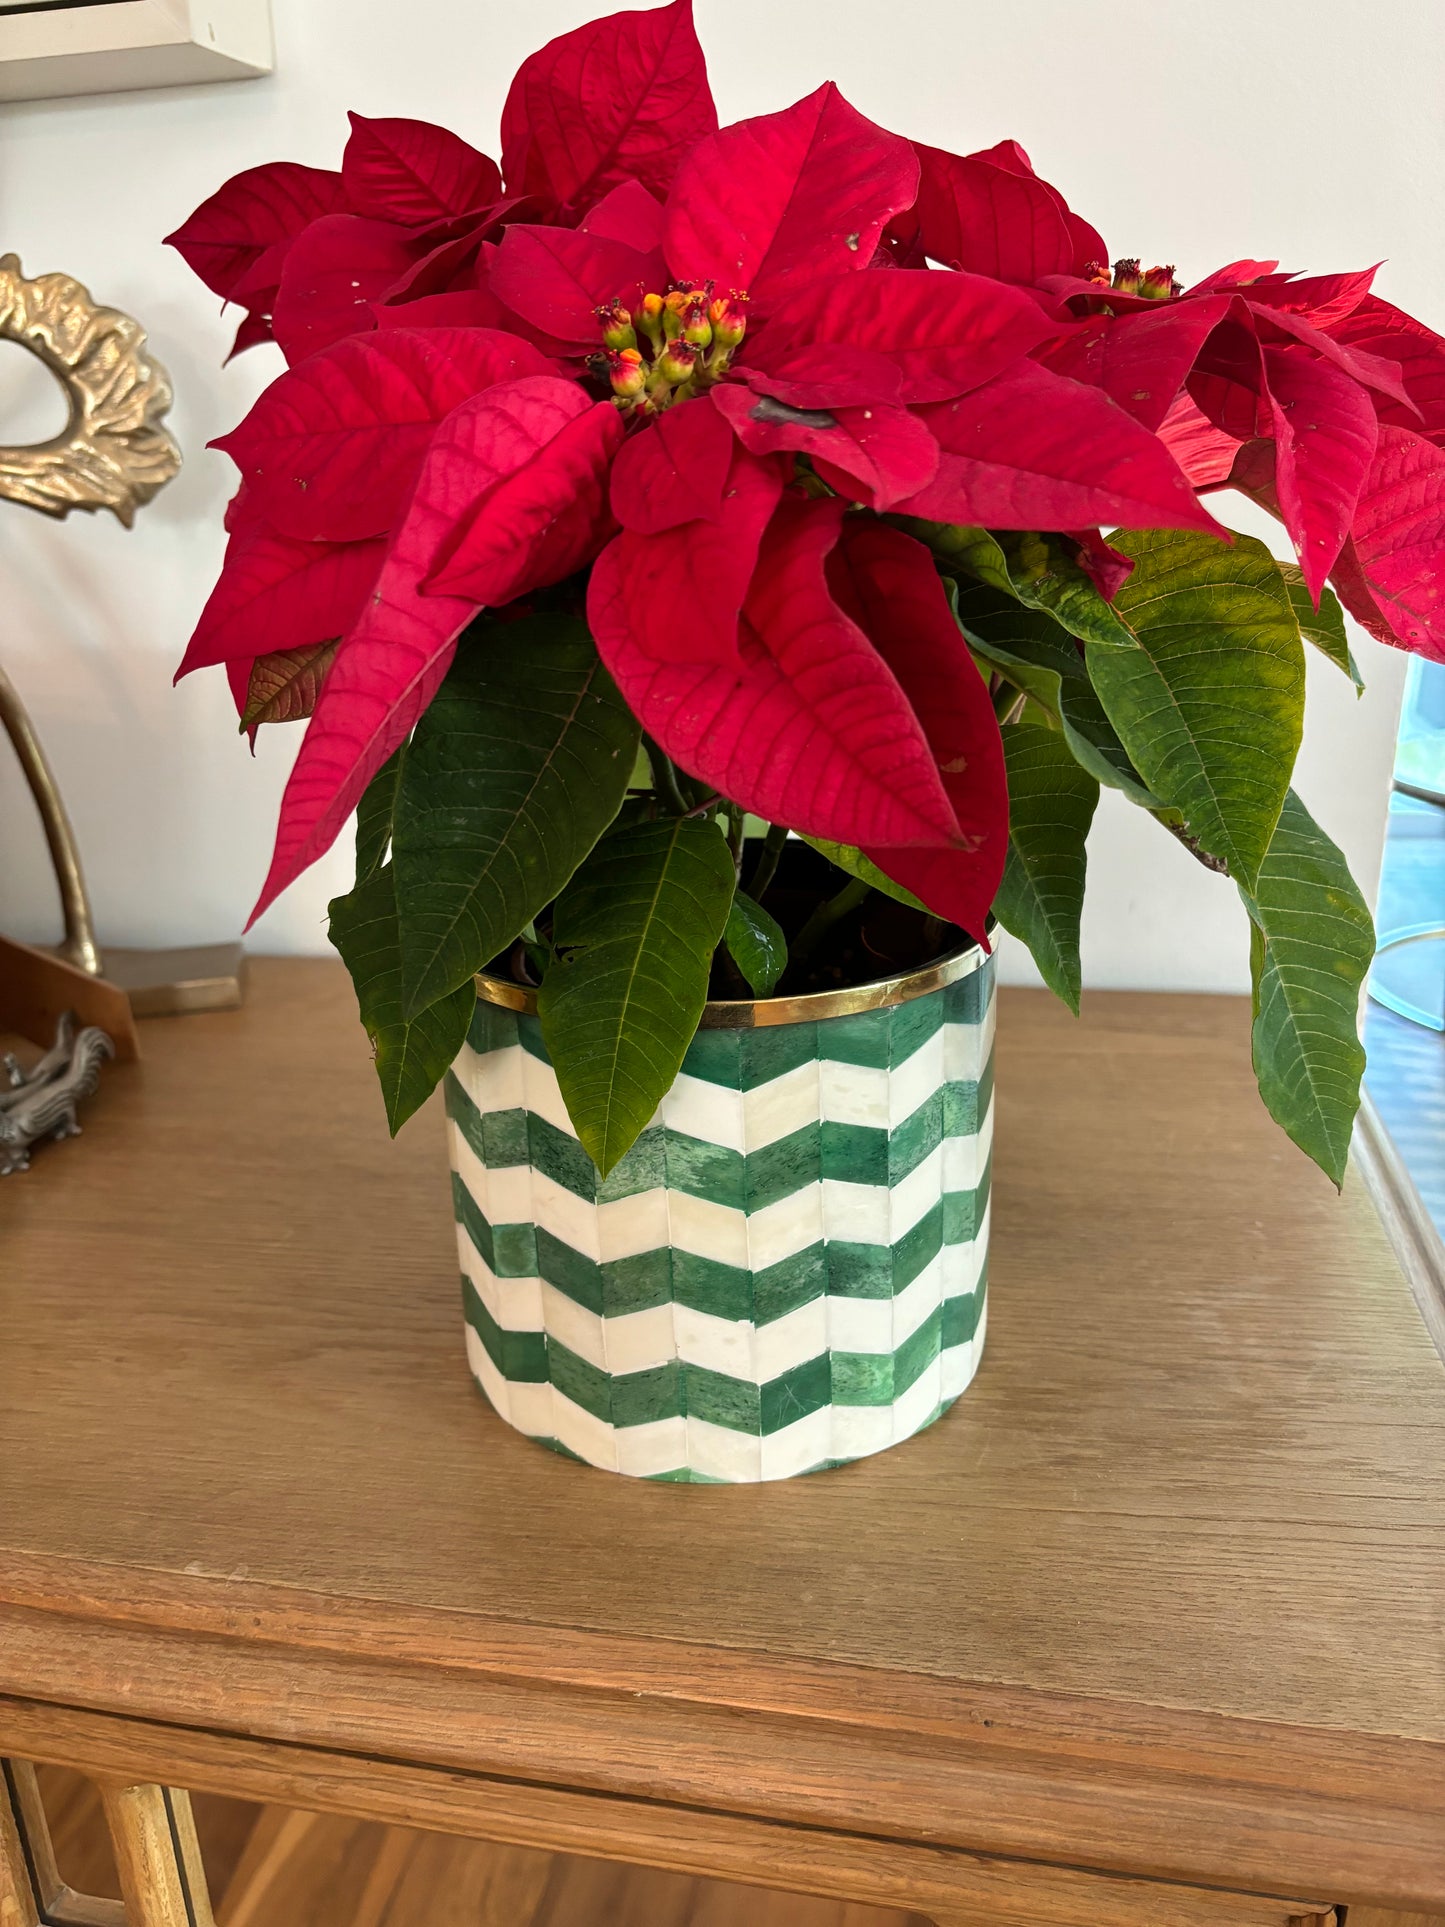 A green and white bone inlay planter with a poinsettia on a sideboard.